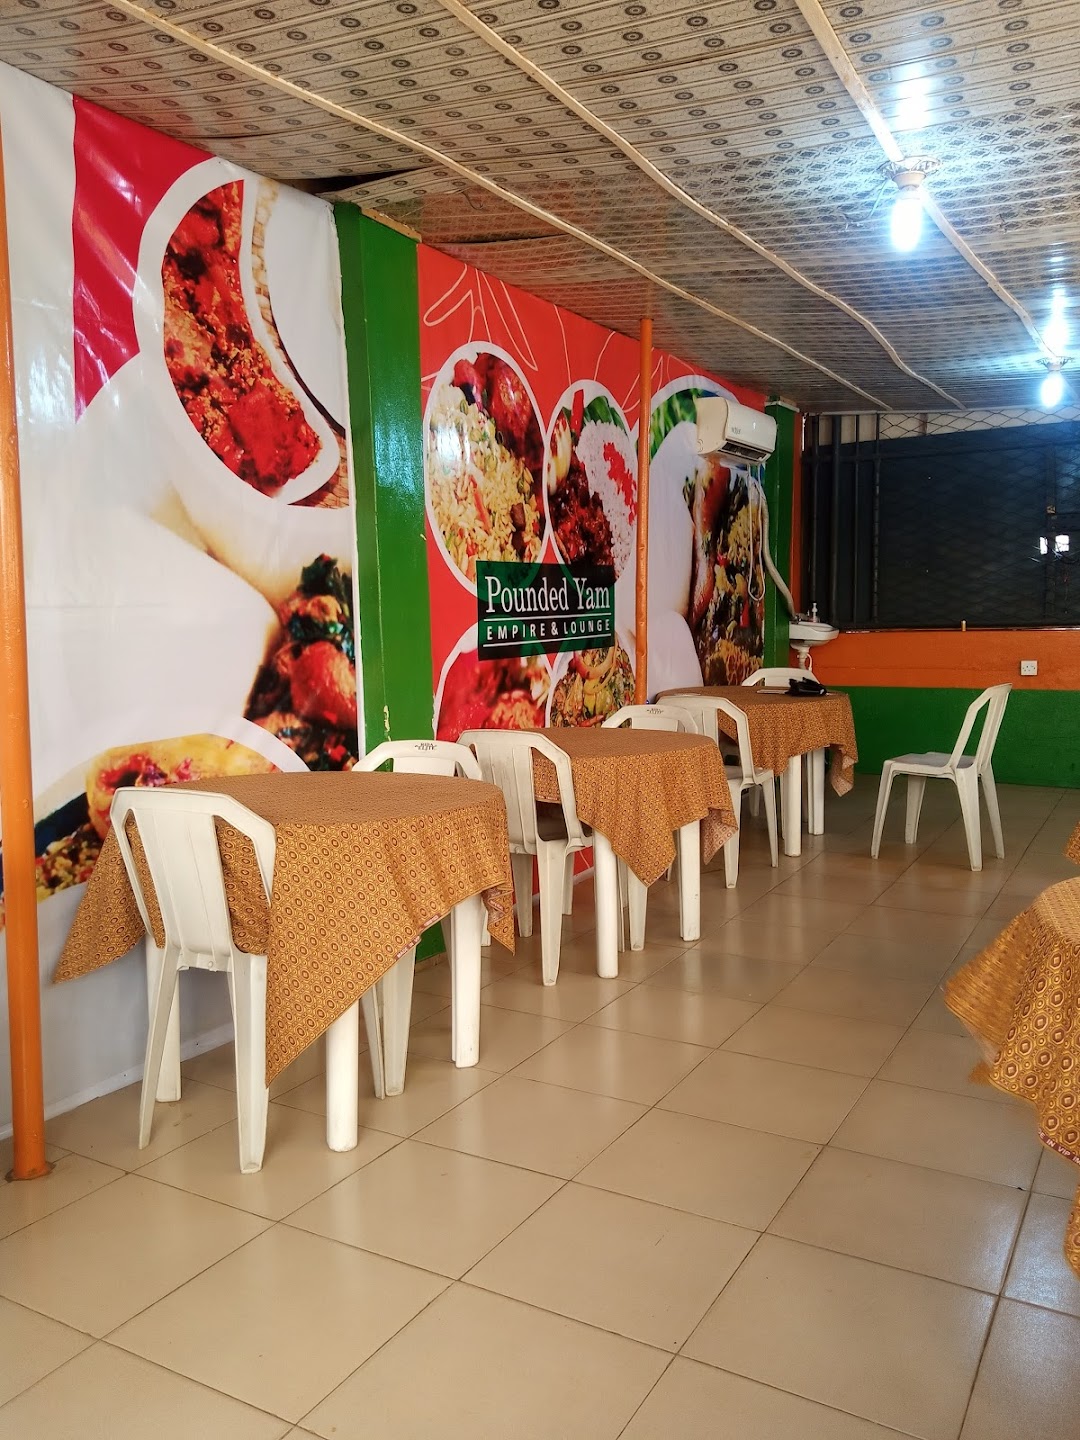 Pounded Yam Empire And Lounge